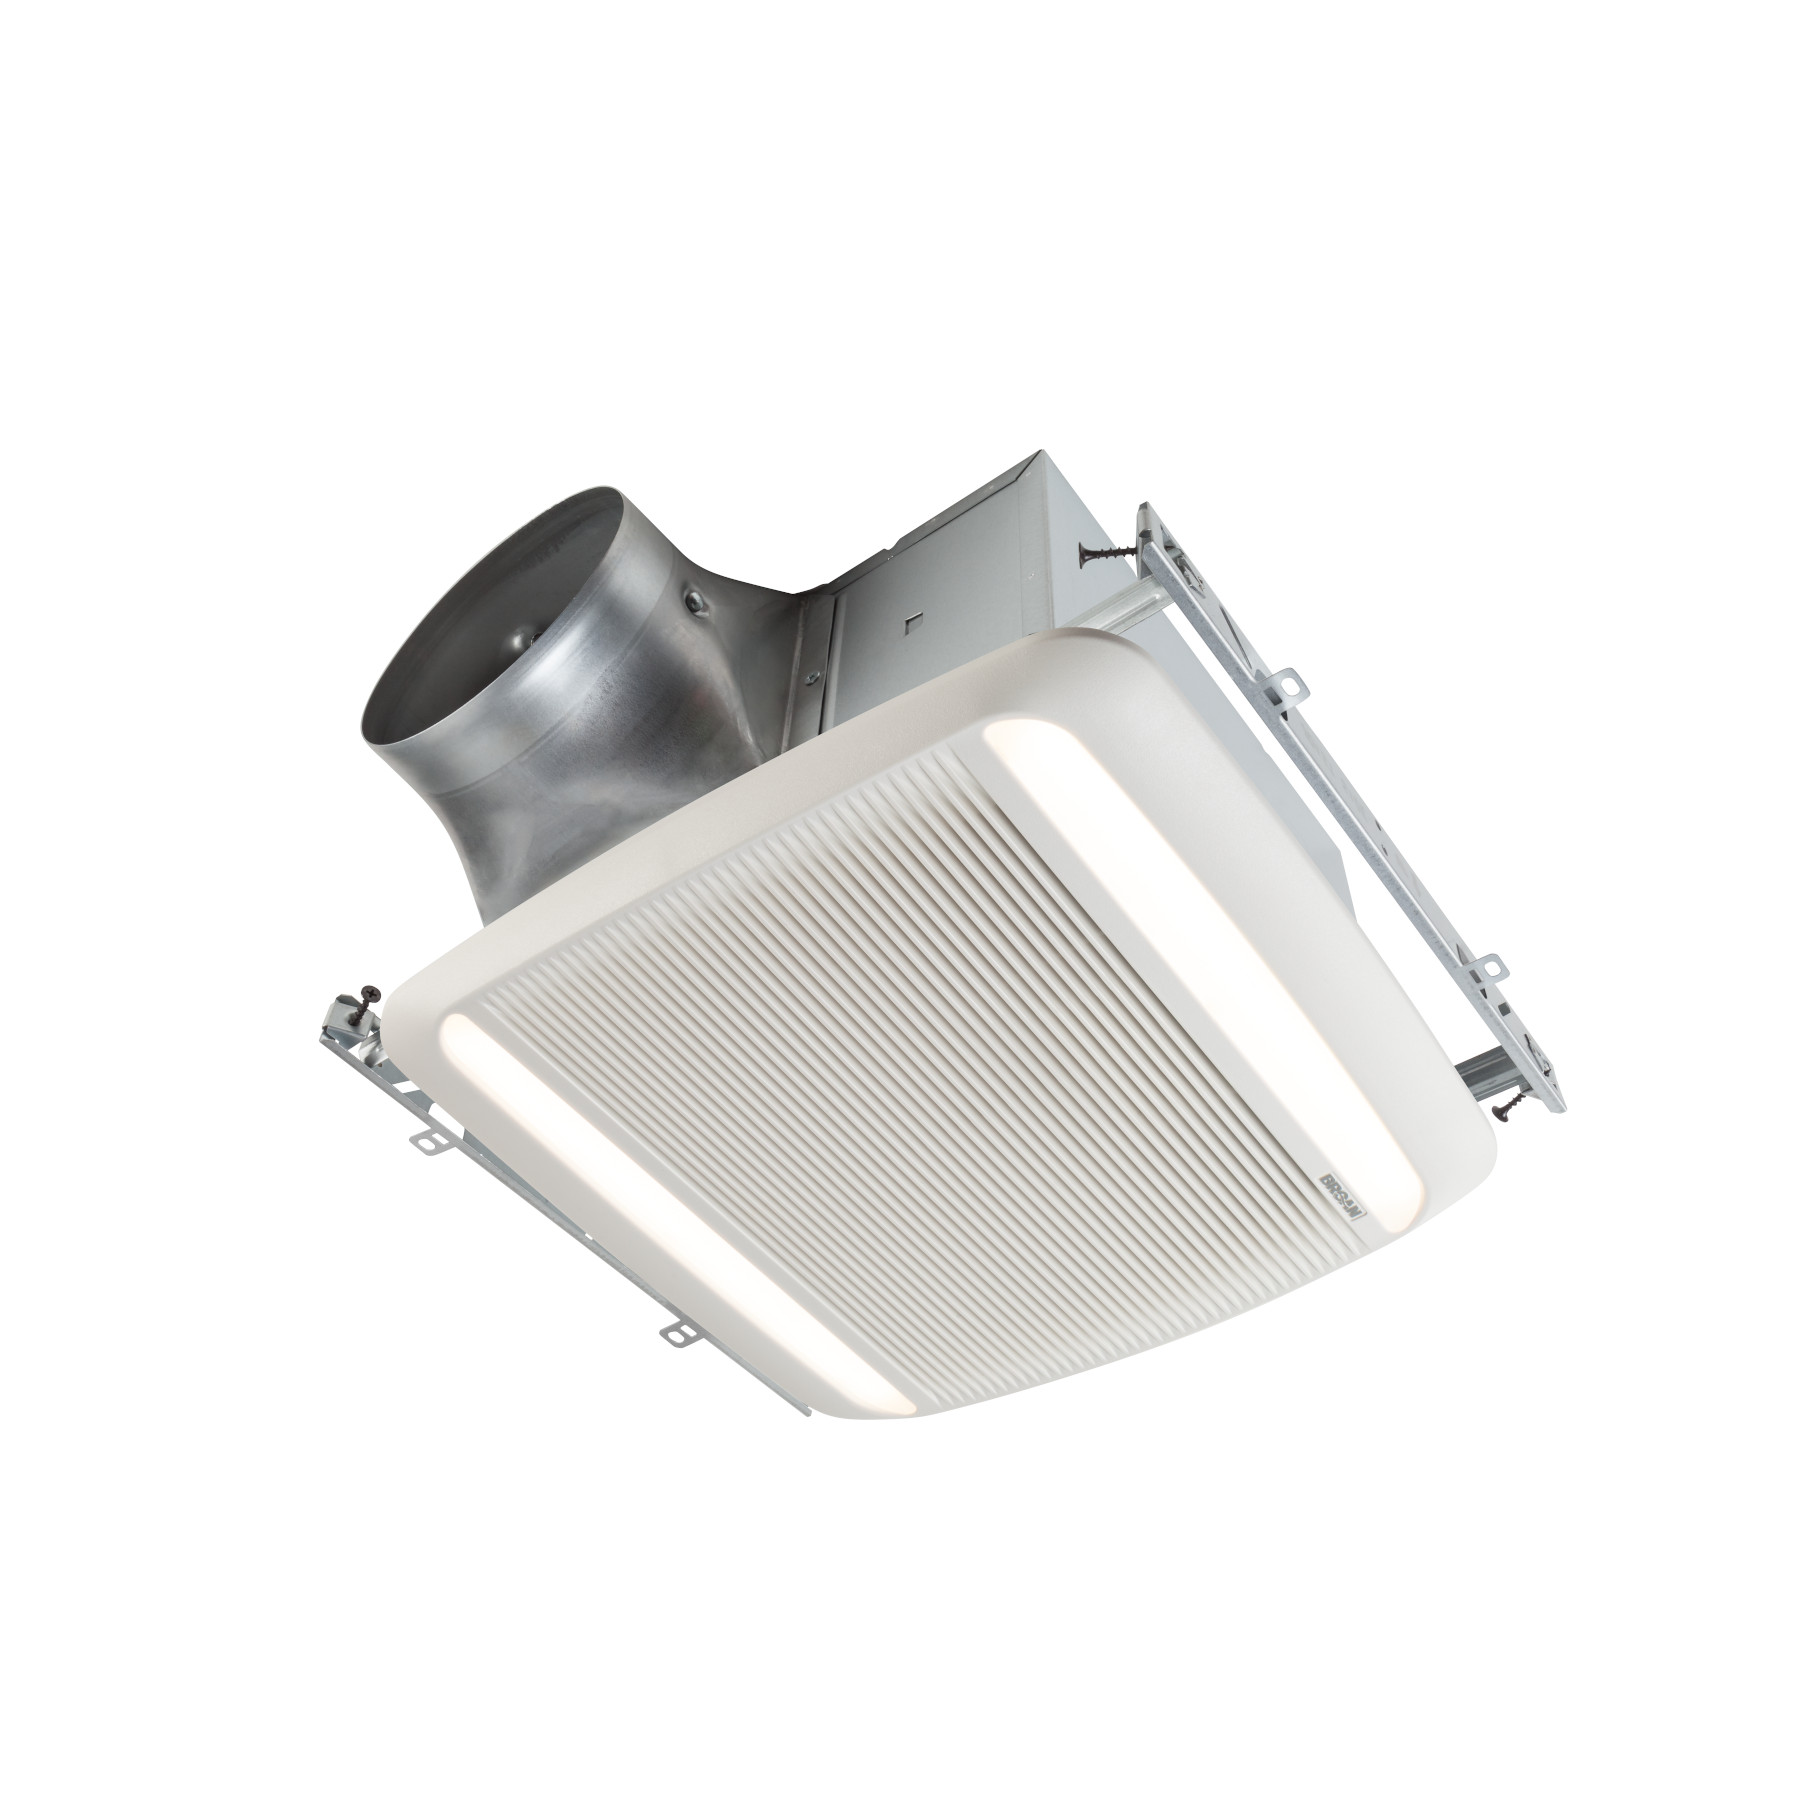 ULTRA GREEN XB Series 80 CFM Ceiling Bathroom Exhaust Fan with LED Light, ENERGY STAR*